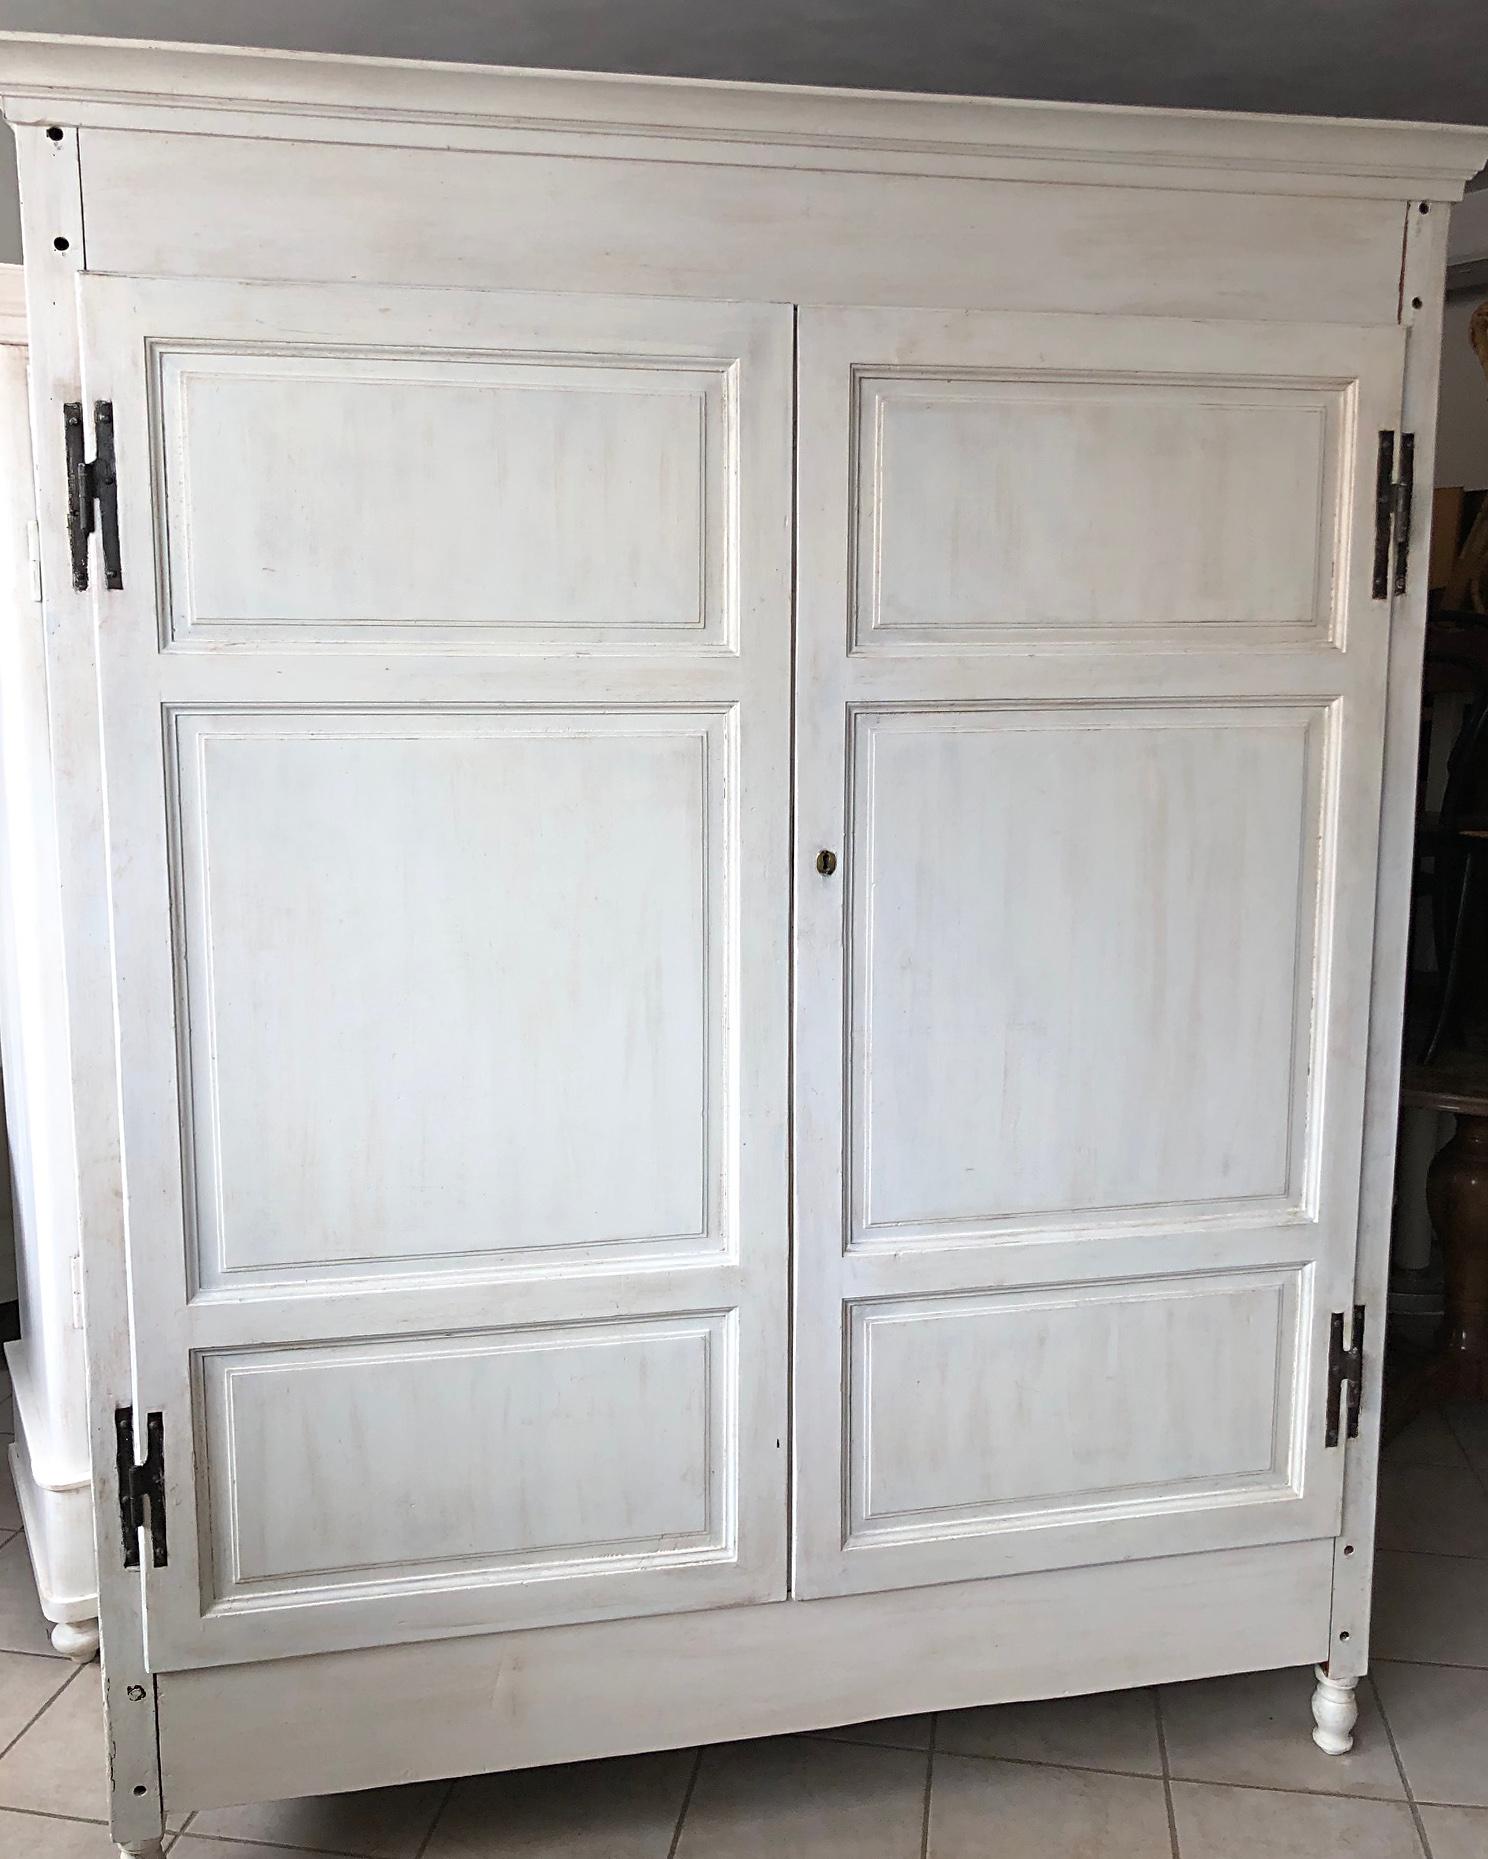 Shabby white wardrobe, original Italian from 1870, with two internal drawers and clothes rail.
The cabinet is completely removable.
The material is Gattice, a kind of local poplar that grows near the Fucecchio marshes.
The frame width included is